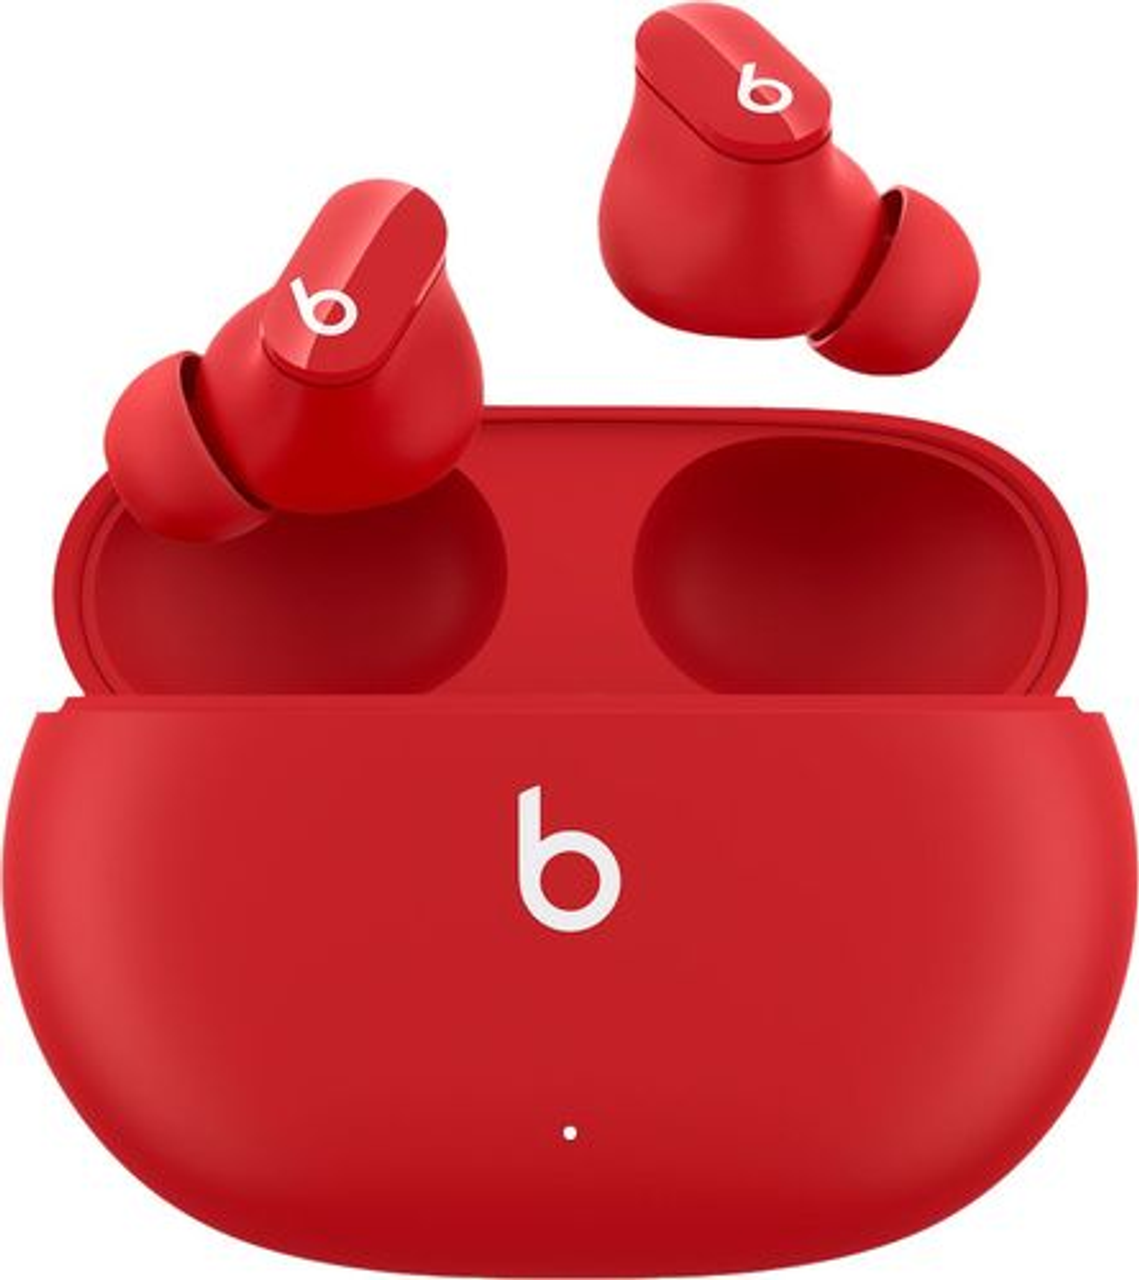 Beats by Dr. Dre - Geek Squad Certified Refurbished Beats Studio Buds Totally Wireless Noise Cancelling Earphones - Beats Red